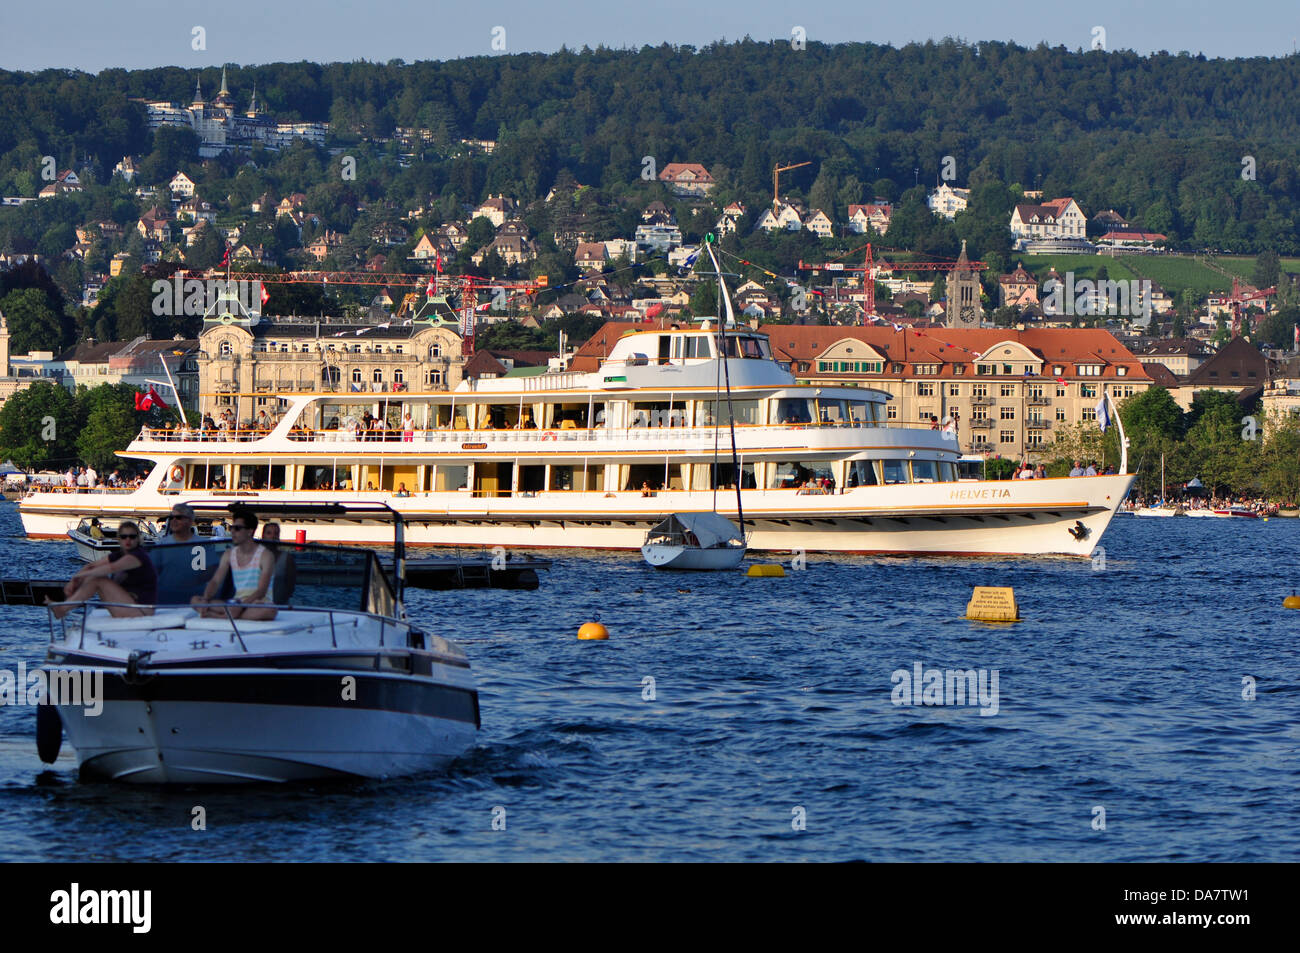 Zurich, Switzerland, 6th July 2013, in the center of Zurich,  one of the biggest European festival is taking place for three days. Parties, Carnival, fairground attractions, market, food and drink stands everywhere. boat trip for zurich fastival on Zurich lake, merchants are along the lake. Credit:  momo leif/Alamy Live News Stock Photo